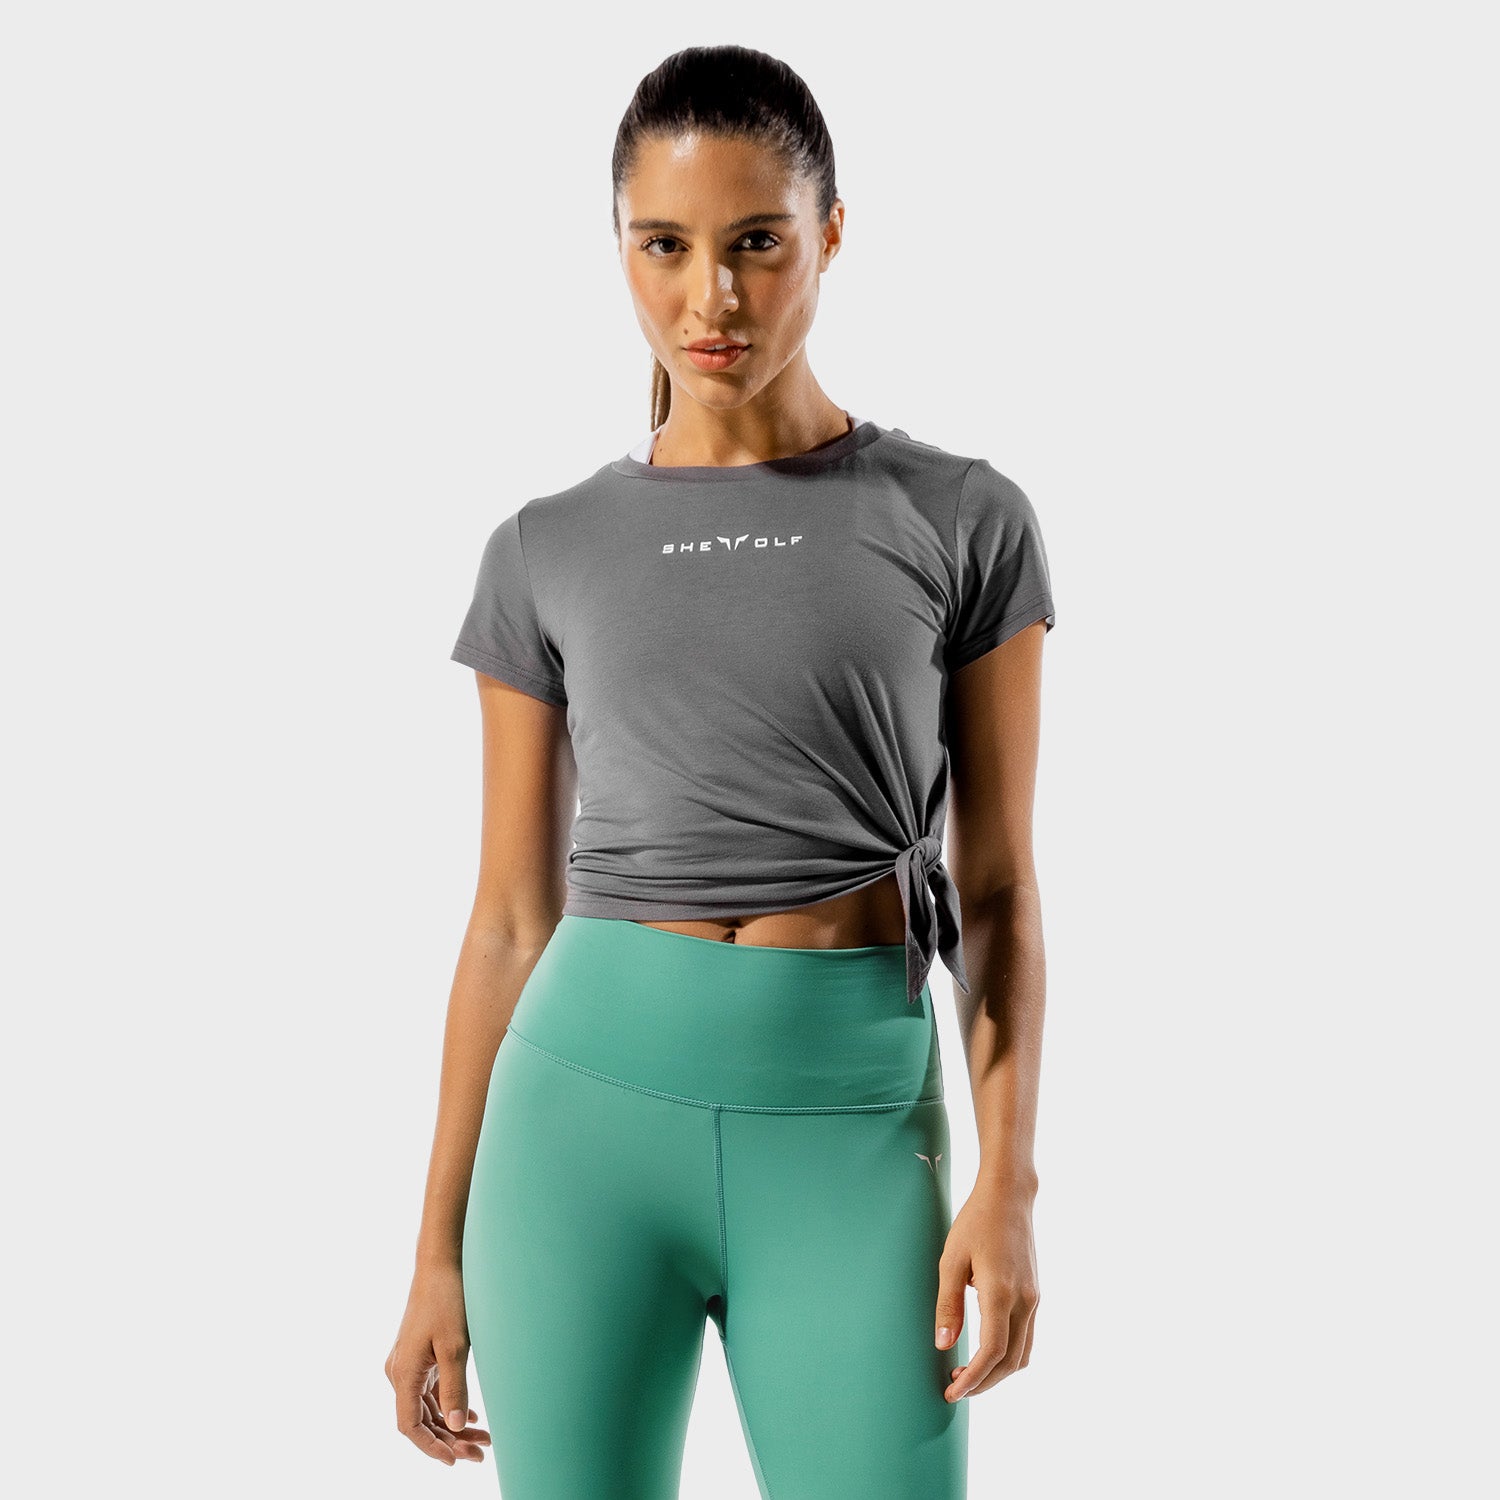 squatwolf-gym-t-shirts-for-women-she-wolf-crop-top-charcoal-workout-clothes